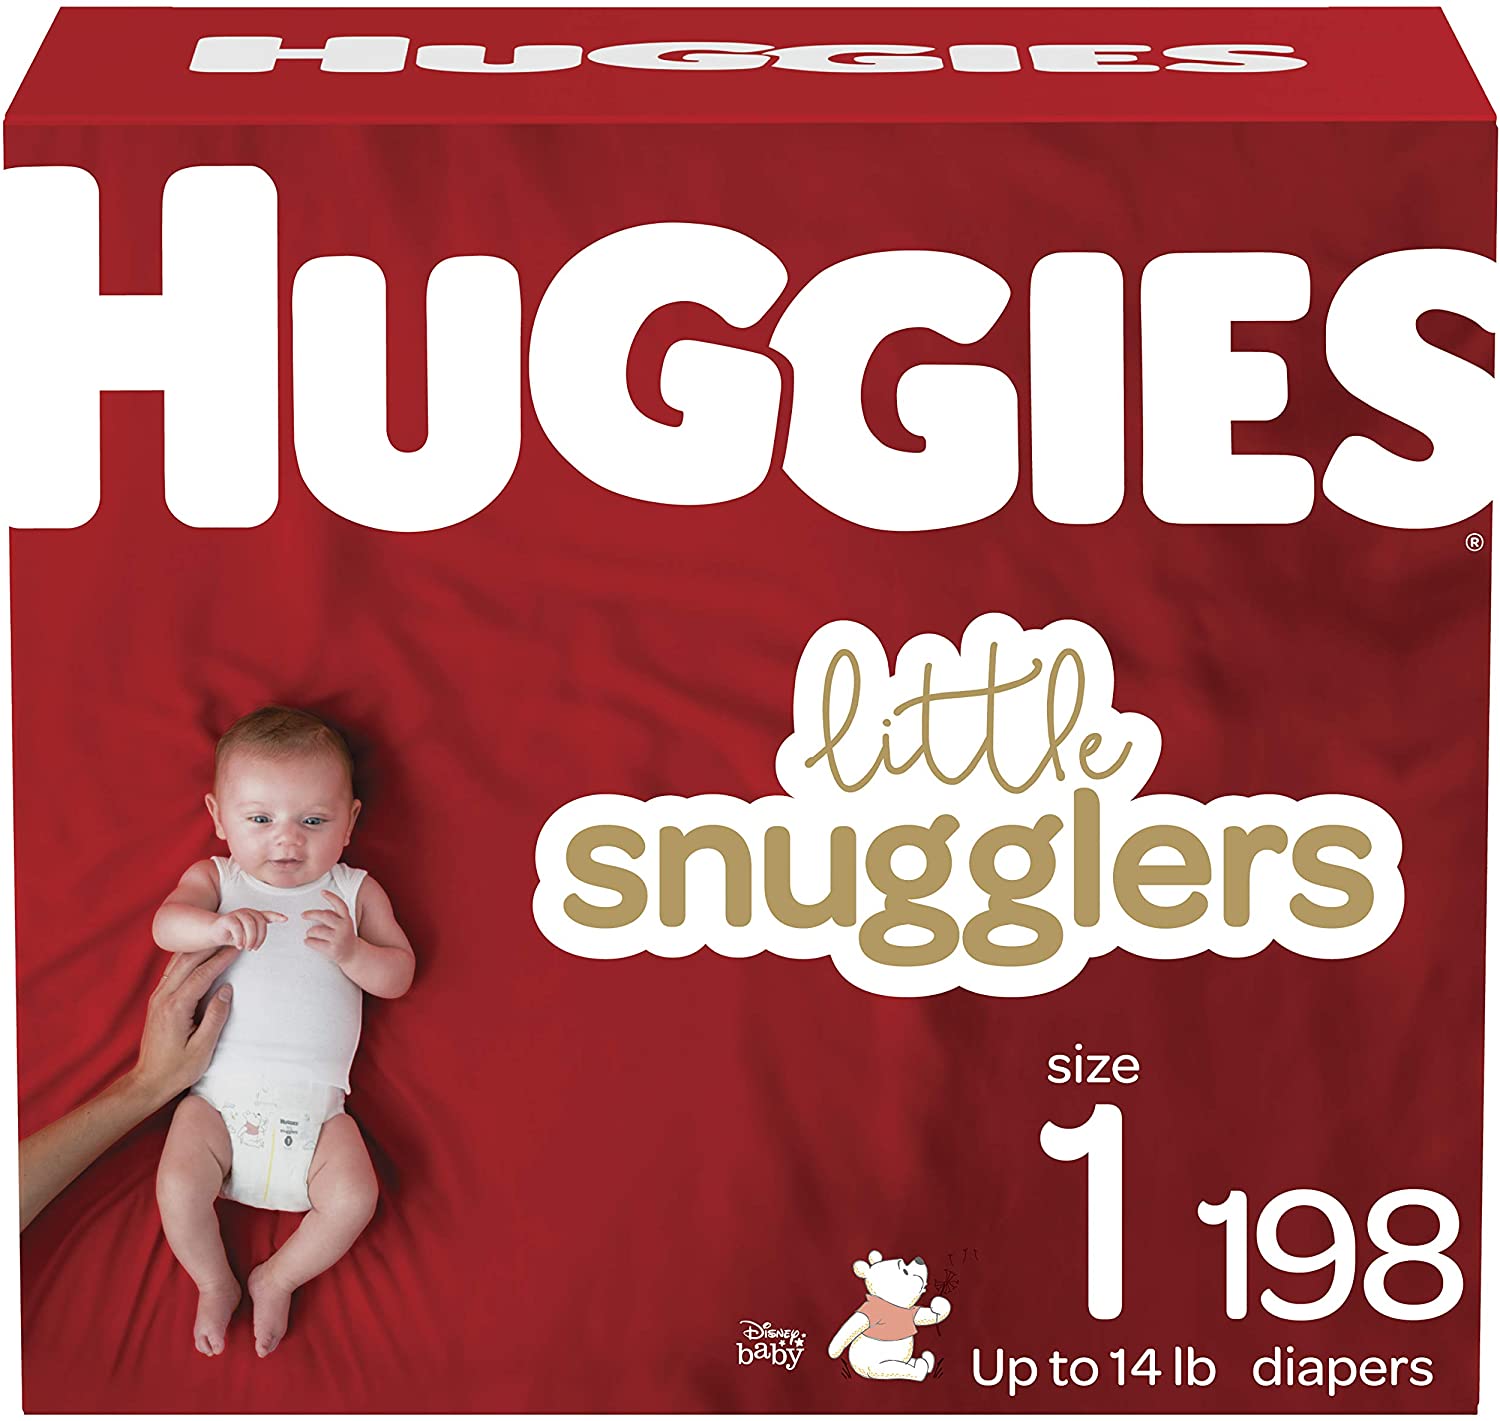 Huggies baby diapers for travel